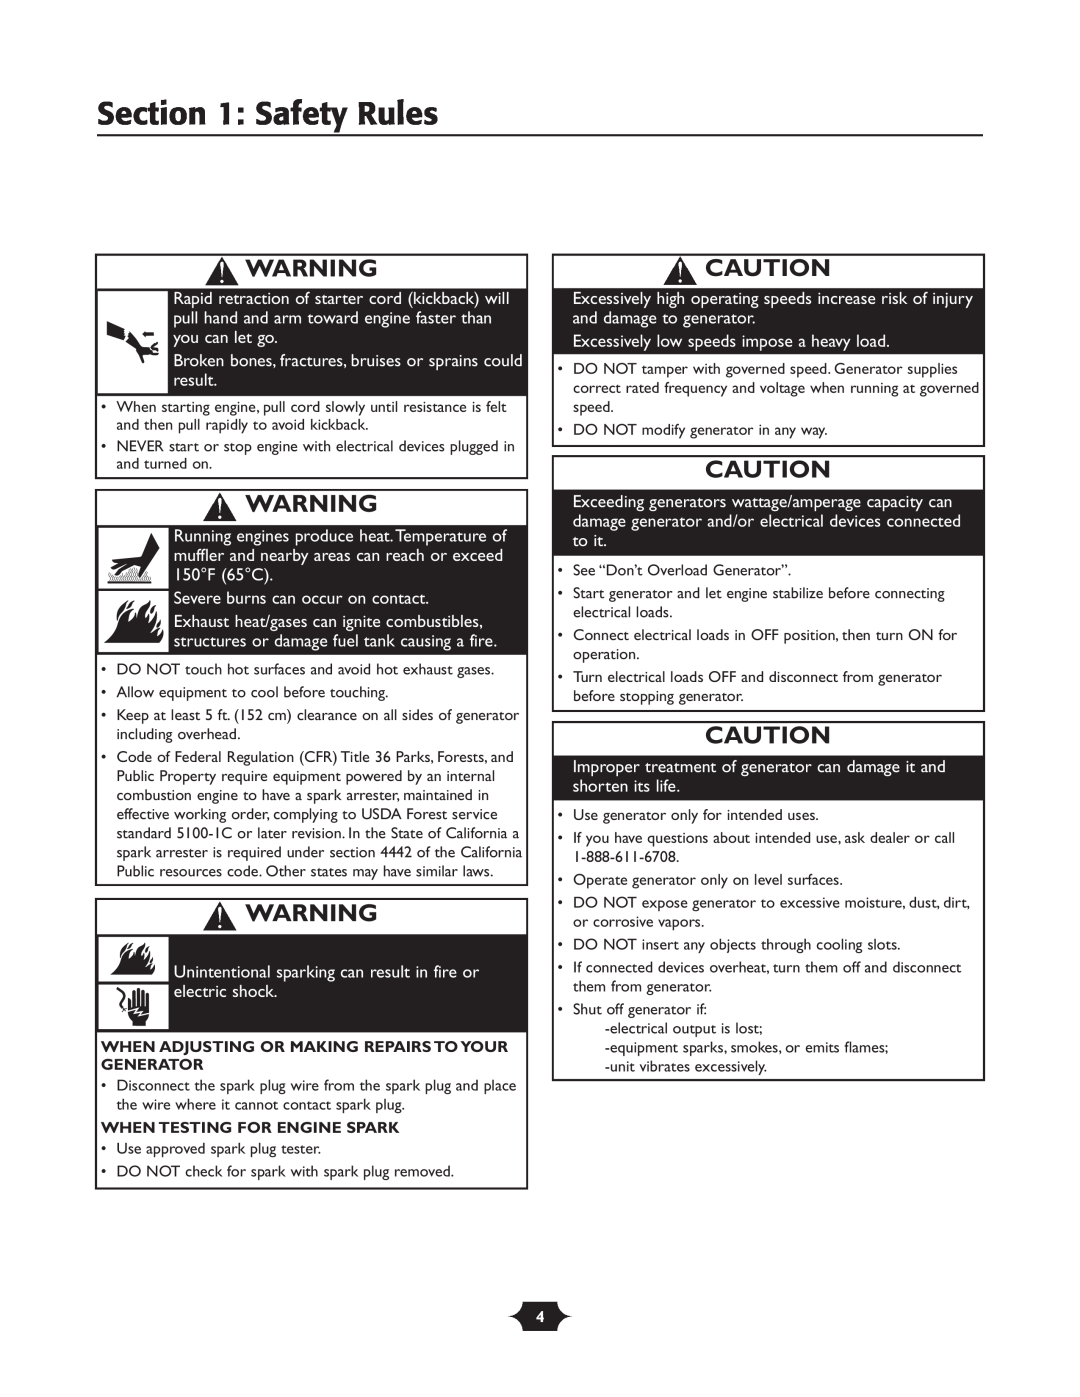 Troy-Bilt 030245 manual Safety Rules, Severe burns can occur on contact 